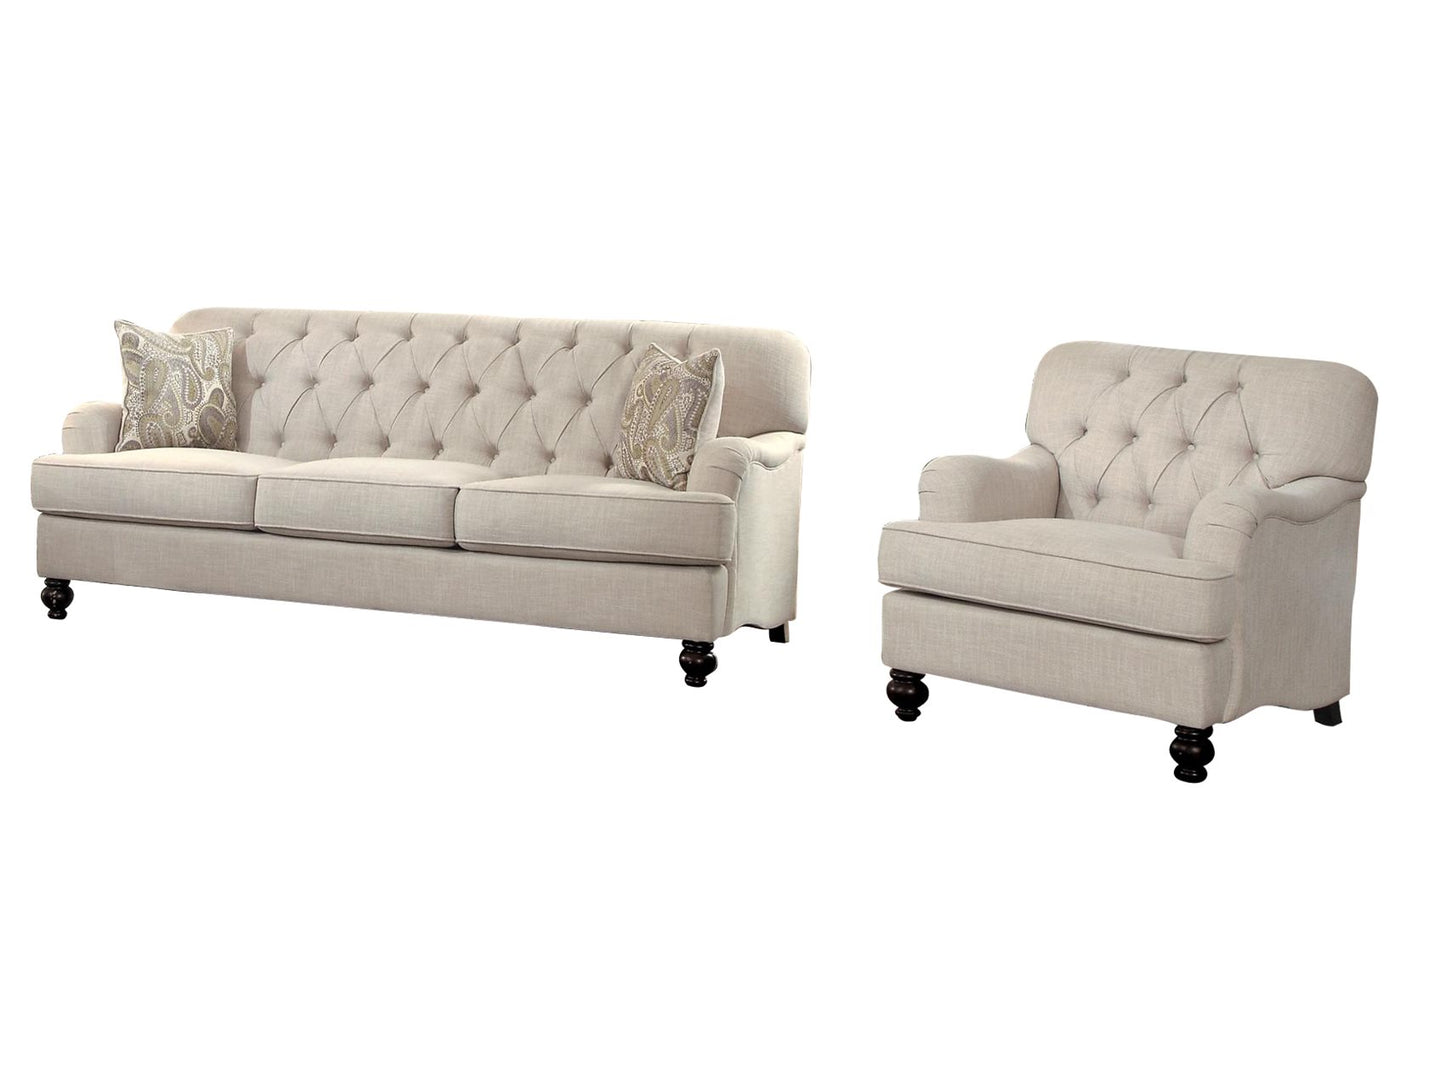 Homelegance Clemencia Park 2PC Sofa & Chair in Natural Fabric